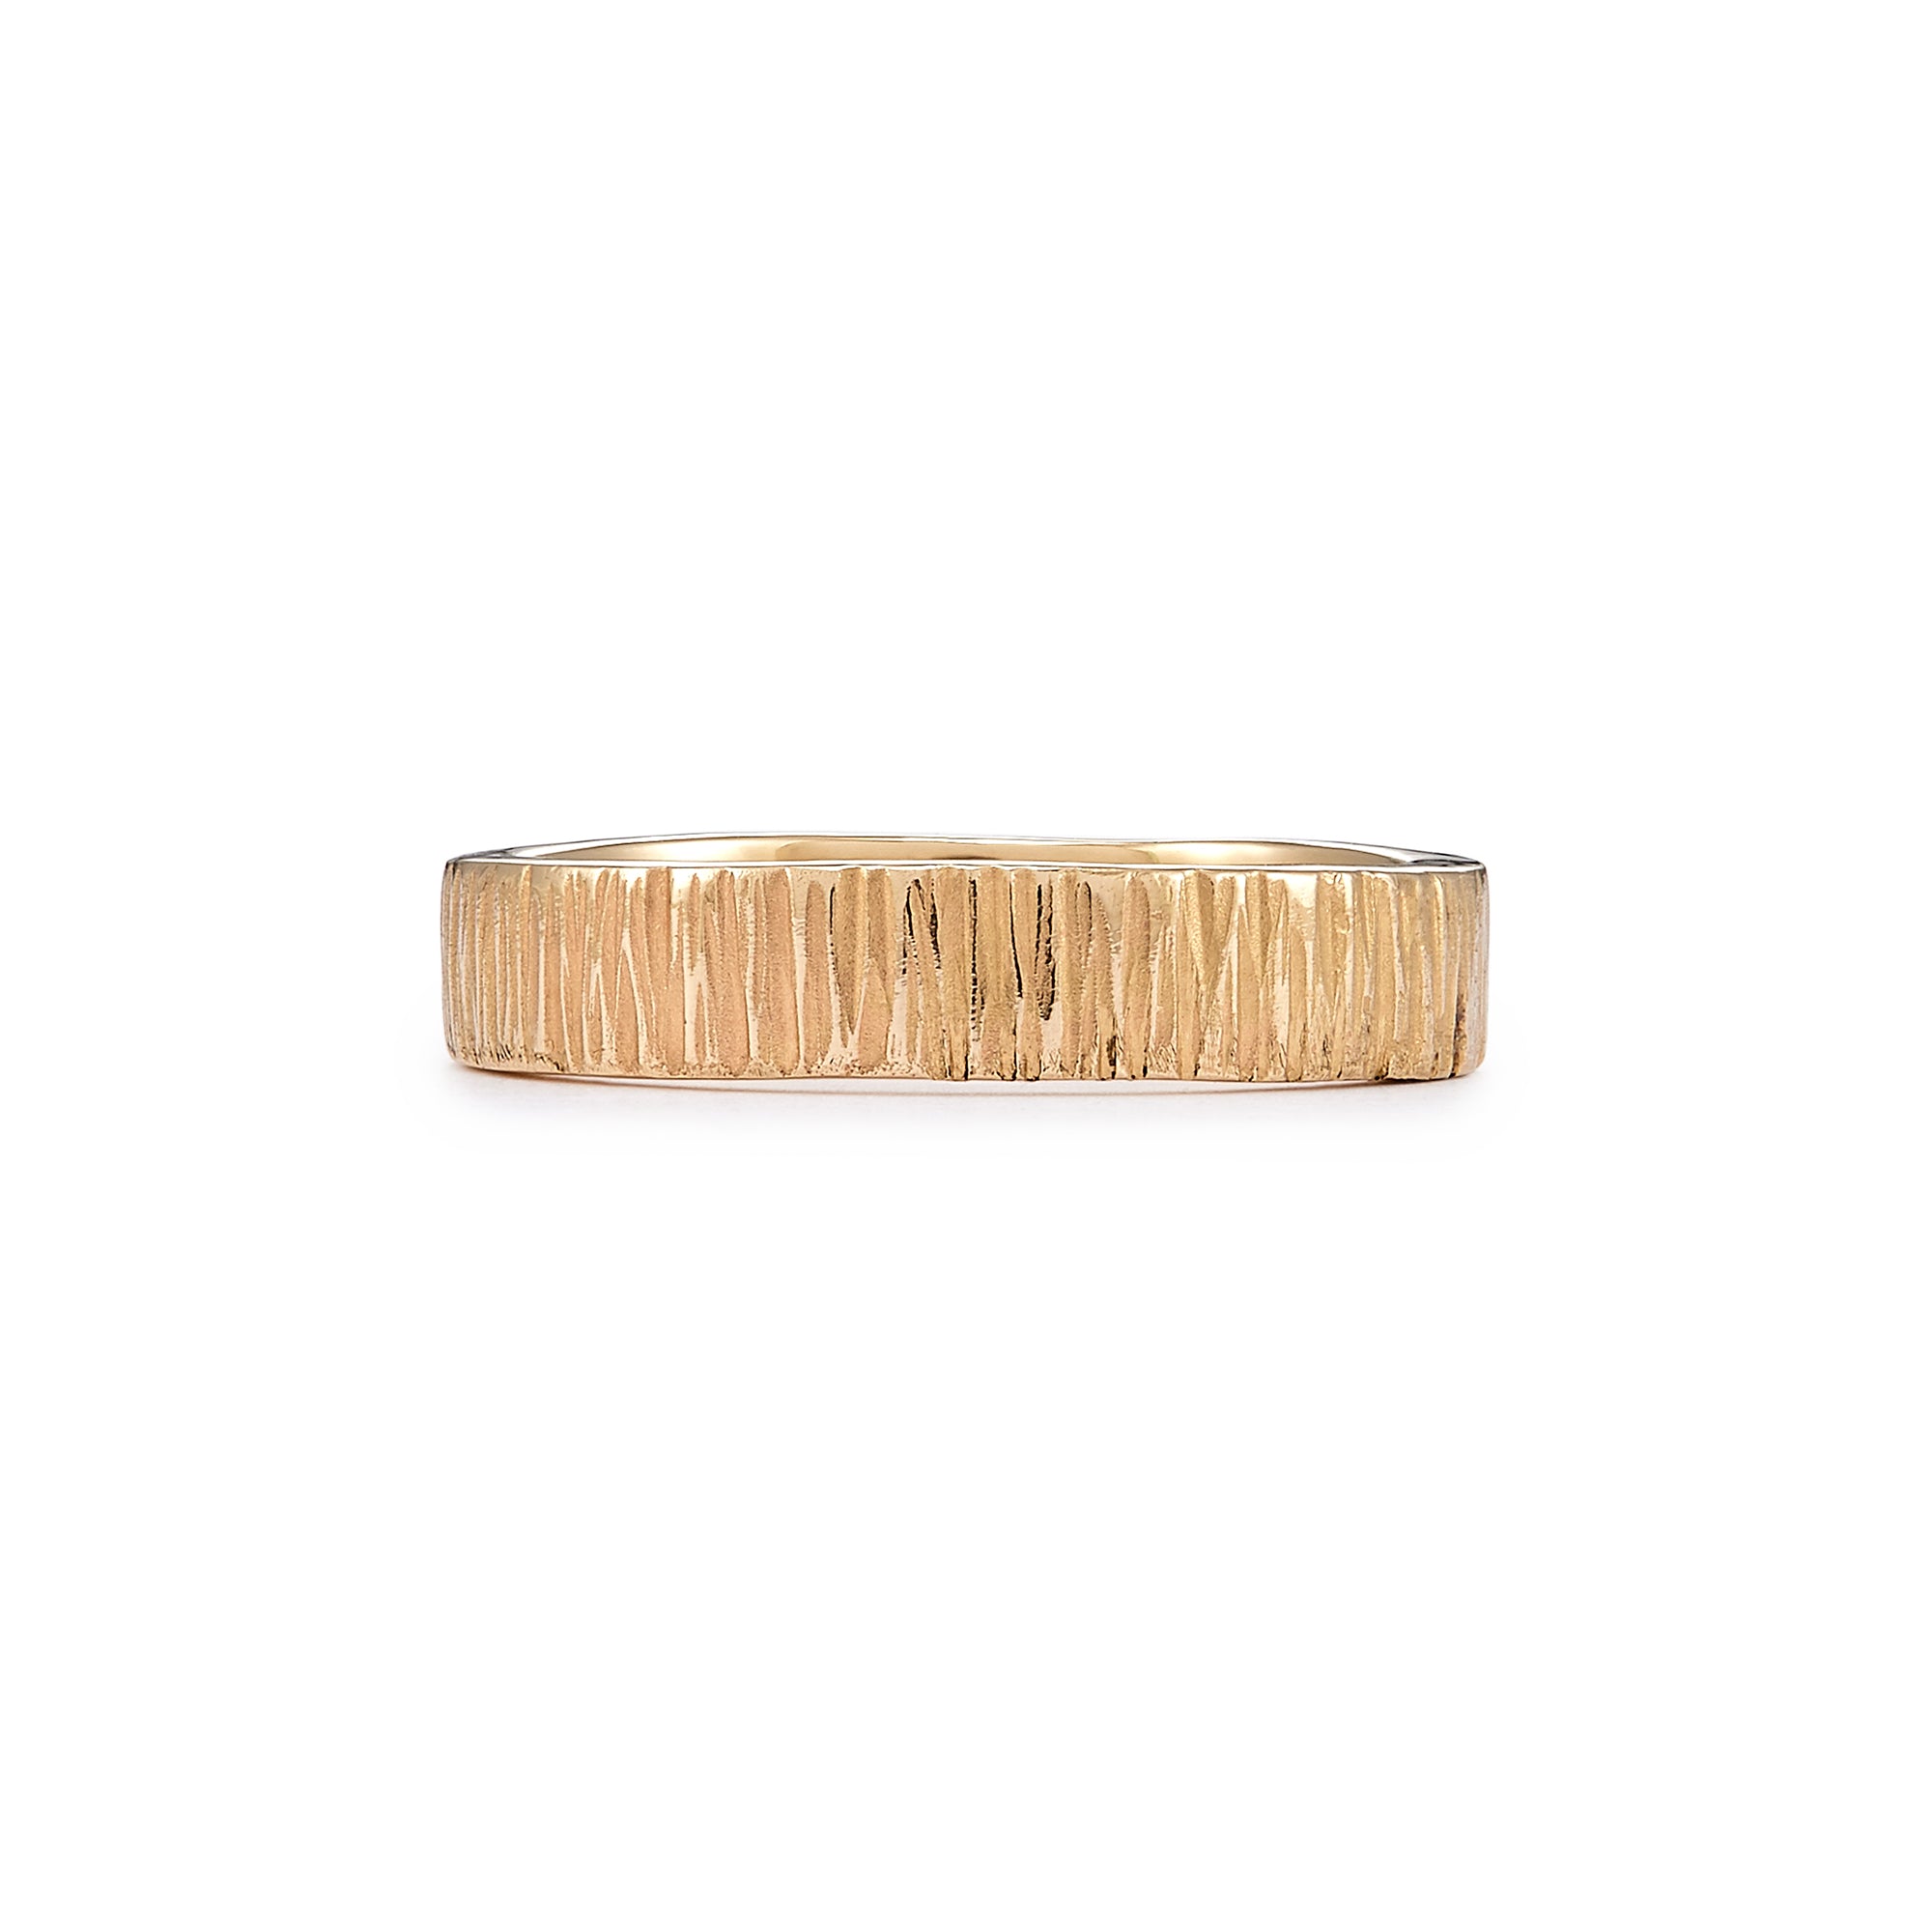 The unisex 4.5mm Lines Band in 14k gold is a classic ring that features a simple vertical lines texture